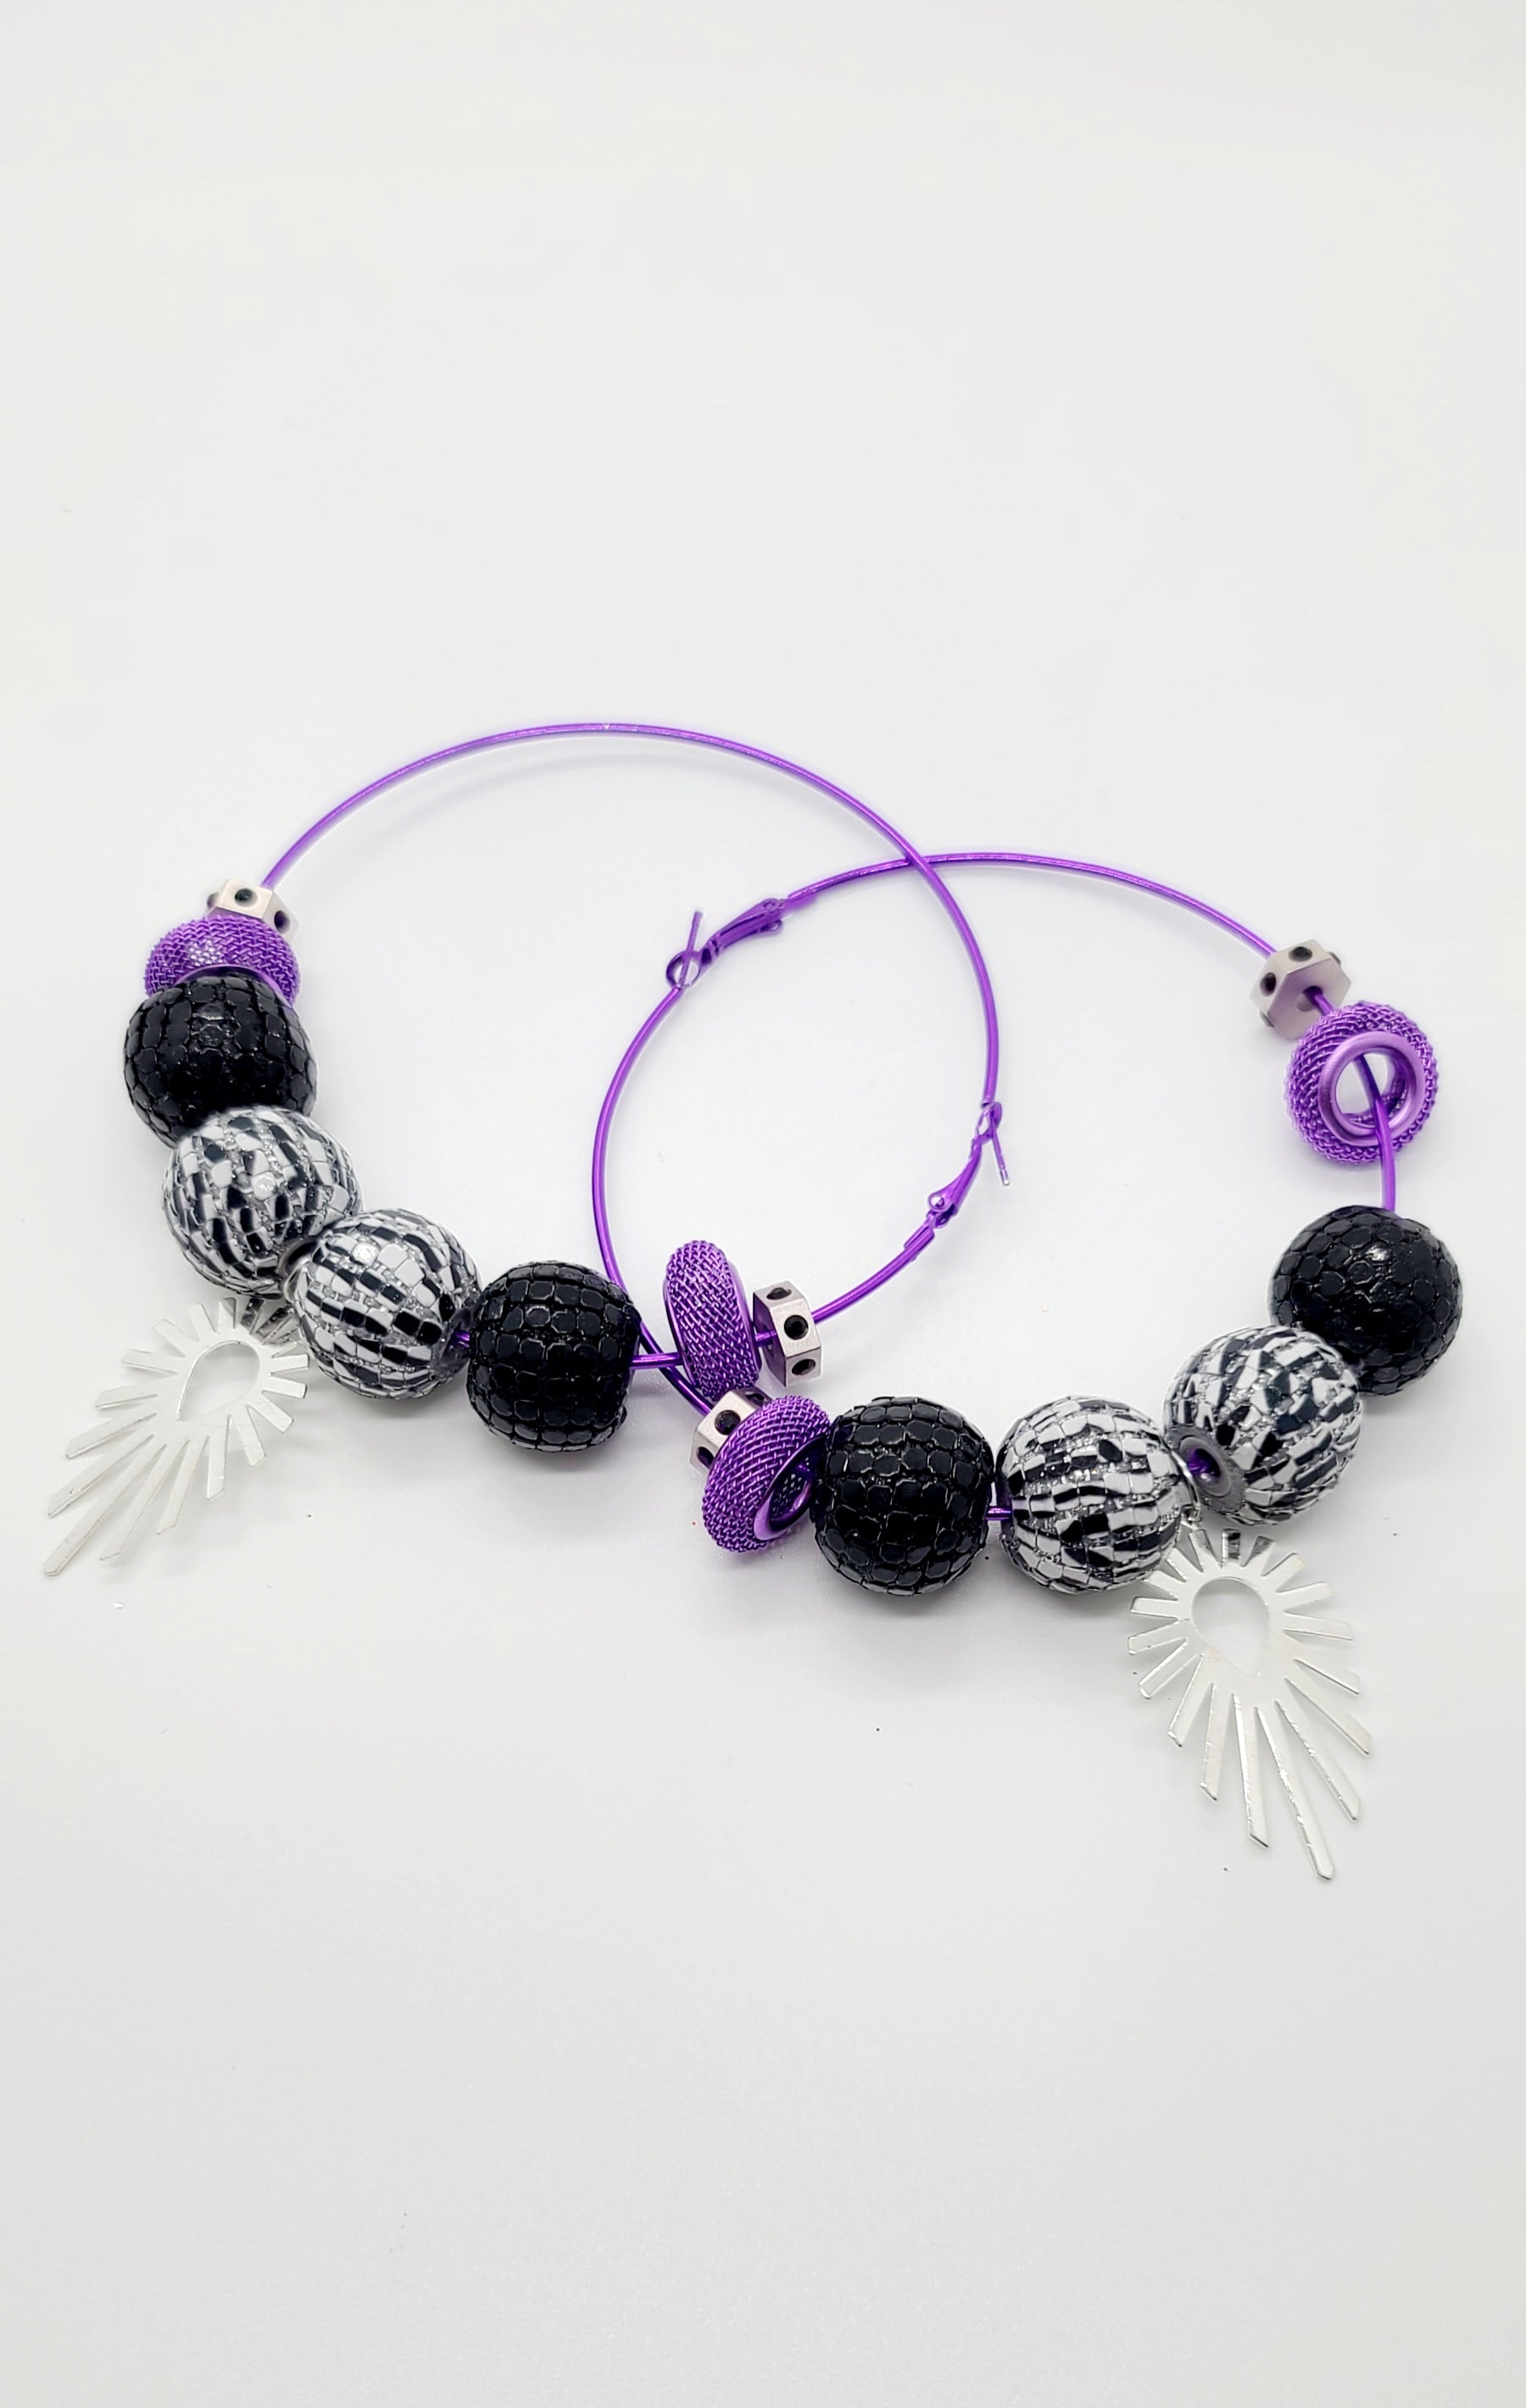 Length: 3.5x3.5 inches | Weight: 2.2 ounces  Distinctly You! These earrings are made with large purple hoops,15mm black and white striped beads, black and silver sequin beads, purple mesh rondelles, chrome hexagon rondelles, and silver sunburst charm.